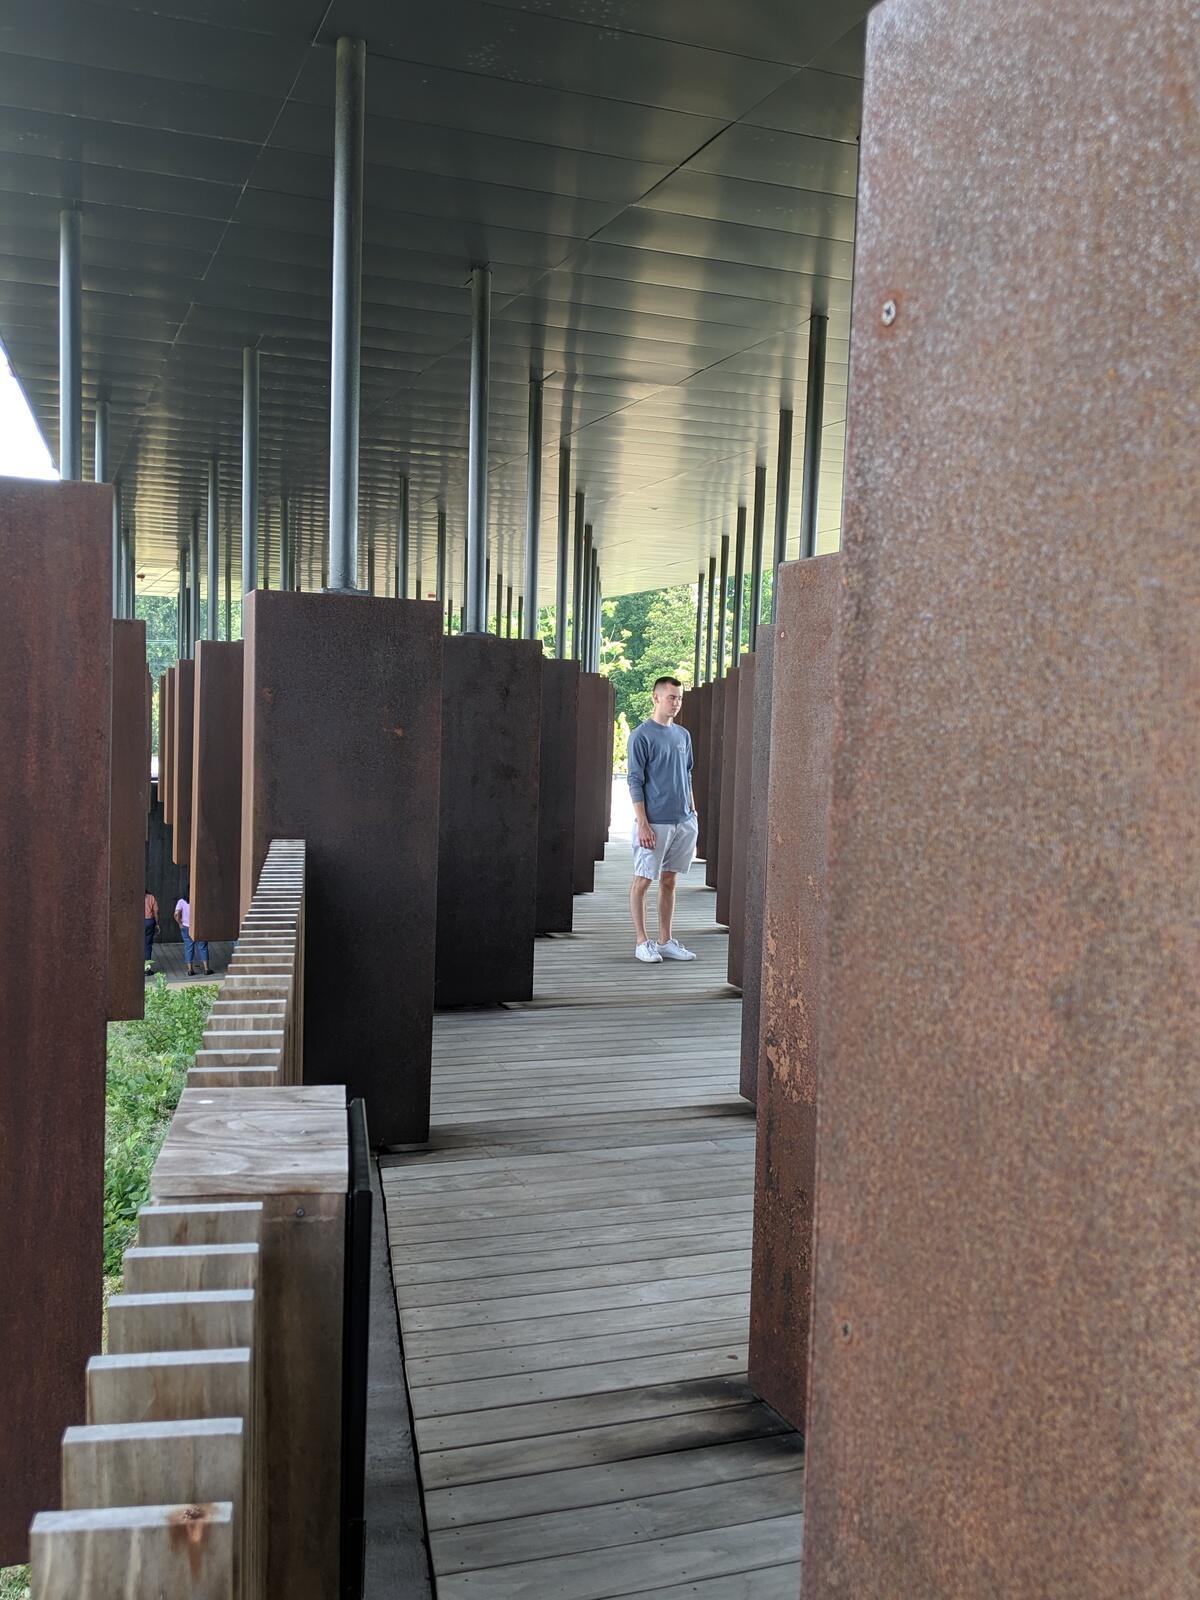 VCU student Alex Cornbrooks standing among the columns comprising the National Memorial for Peace and Justice.